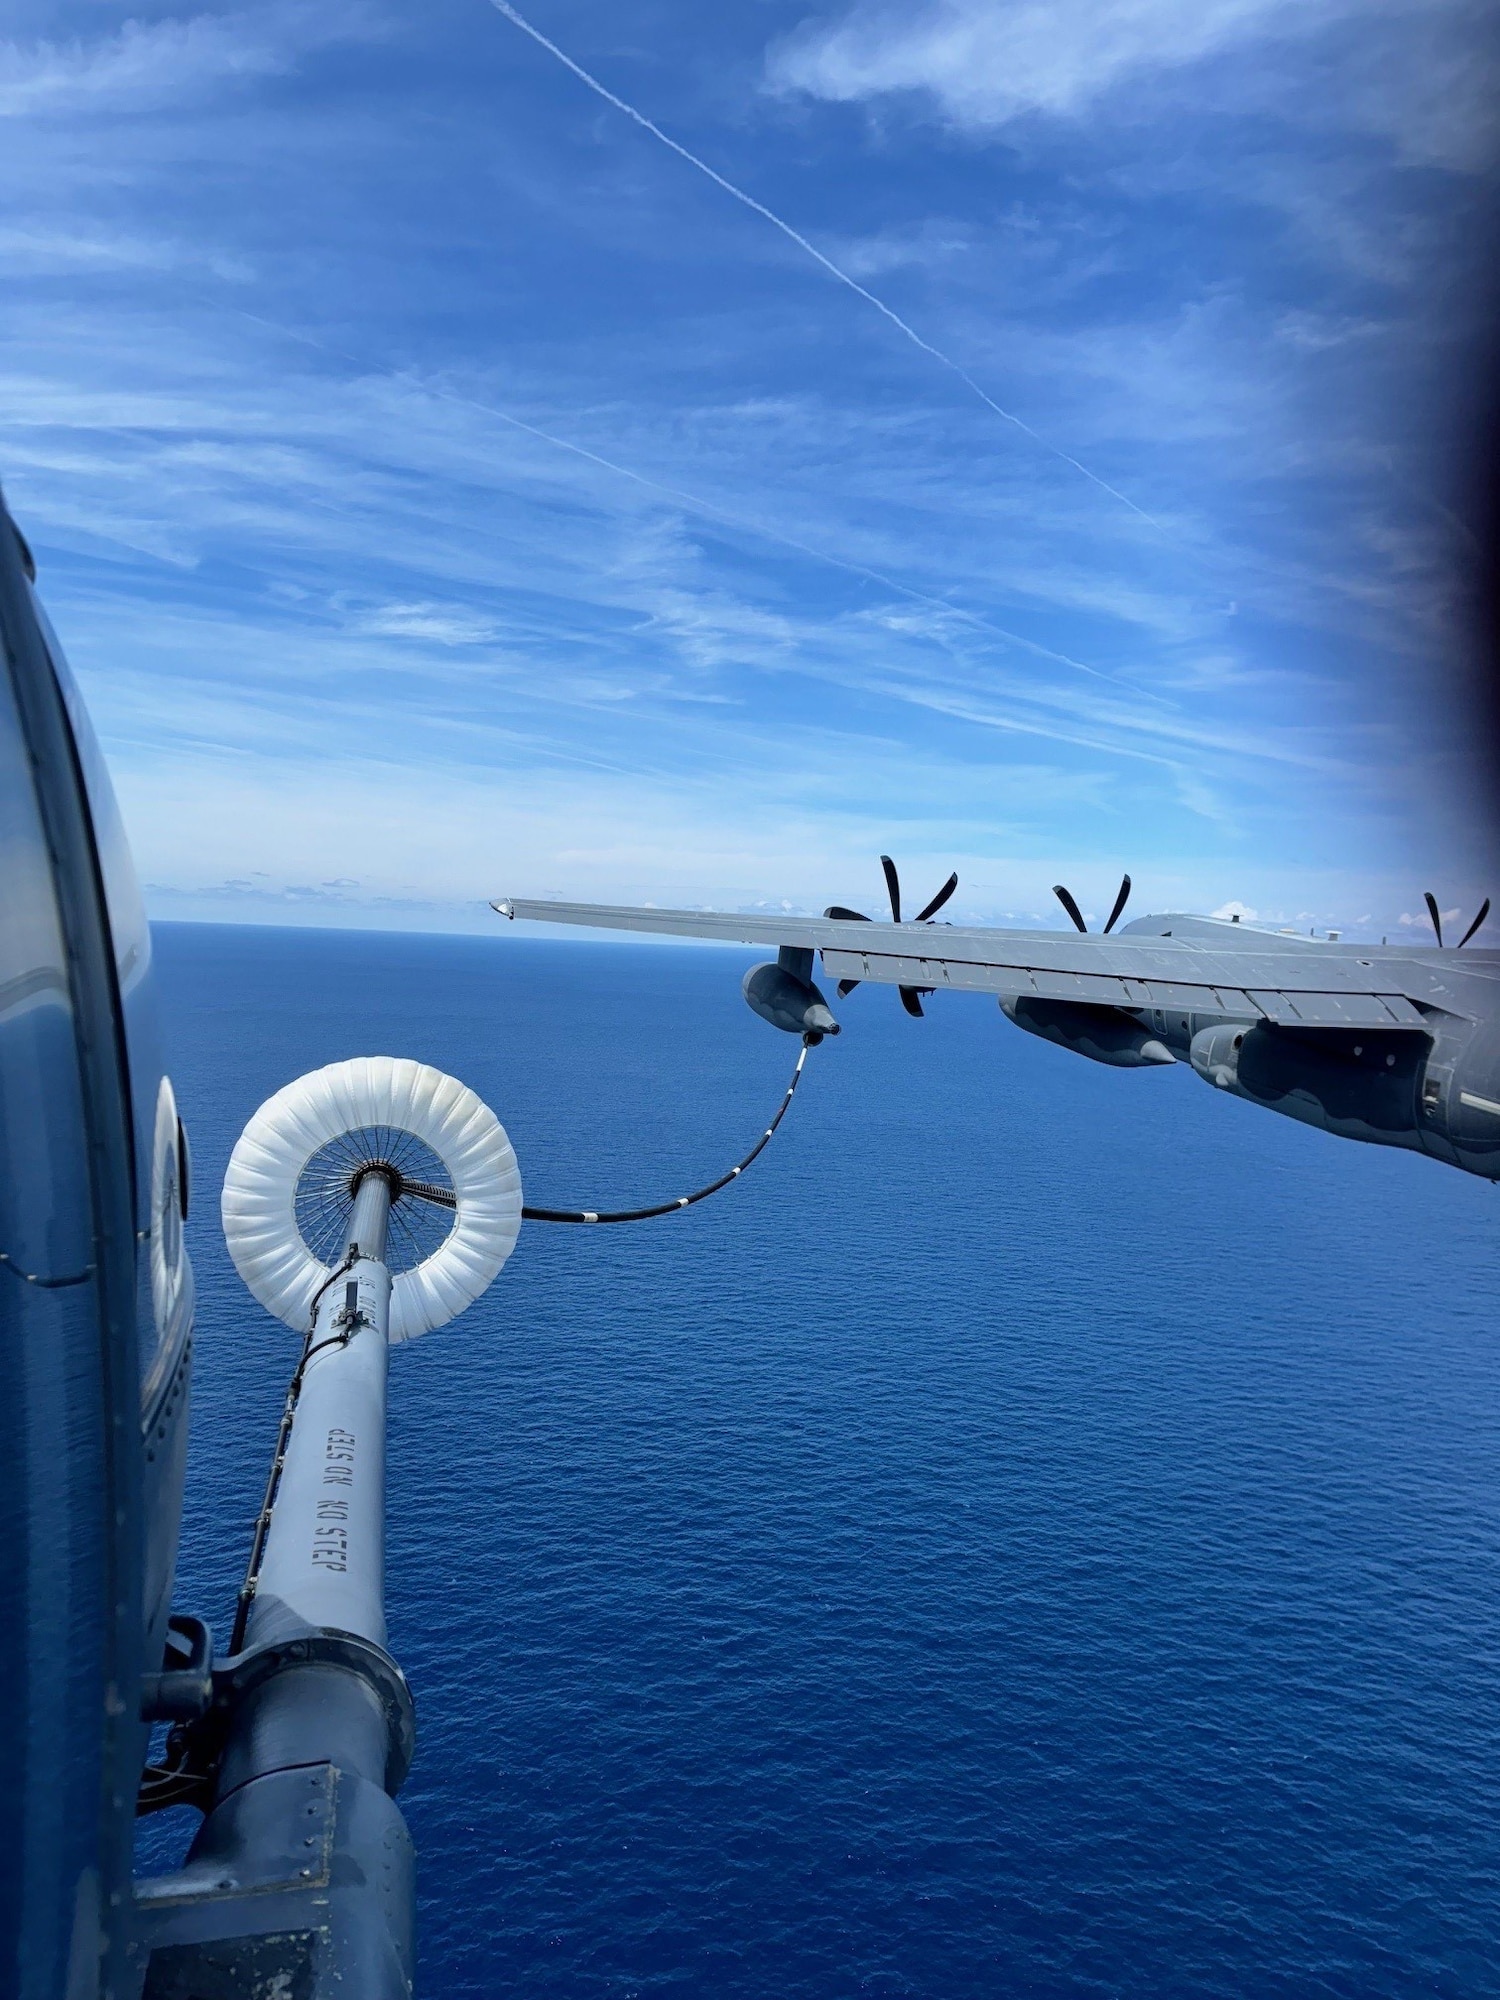 920th Rescue Wing conducts civil search and rescue operation